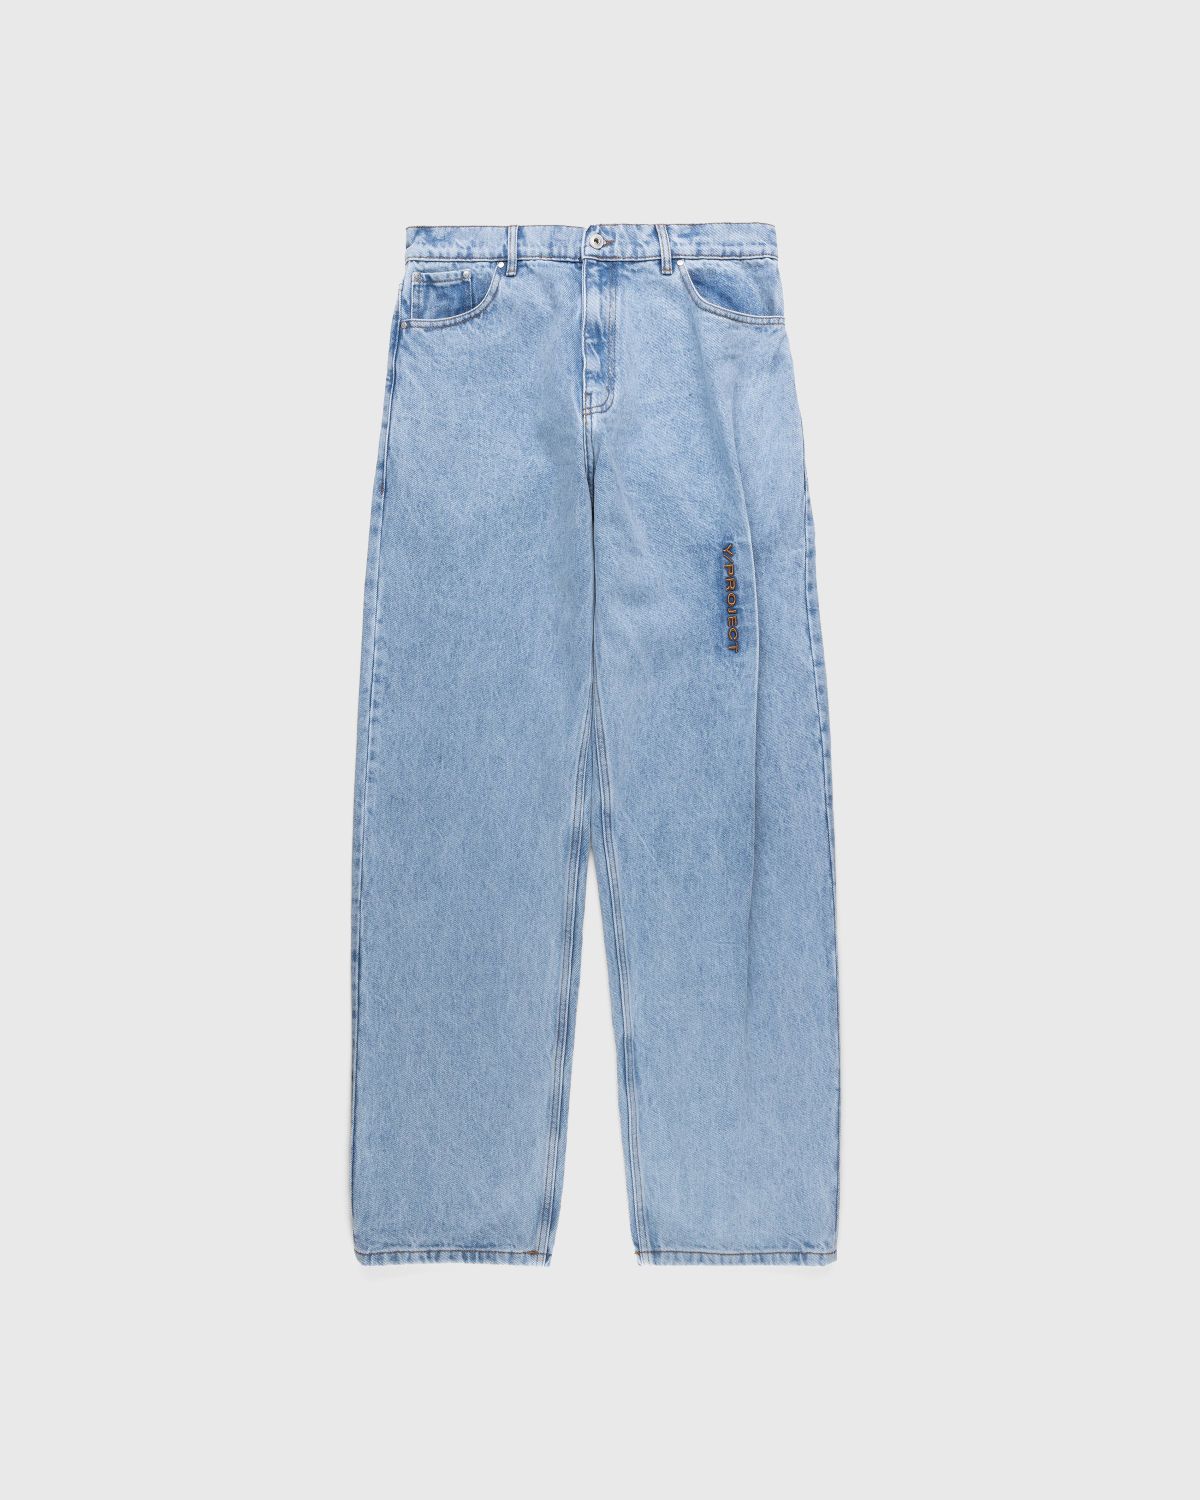 Y/Project – Pinched Logo Jeans Blue - Pants - Blue - Image 1